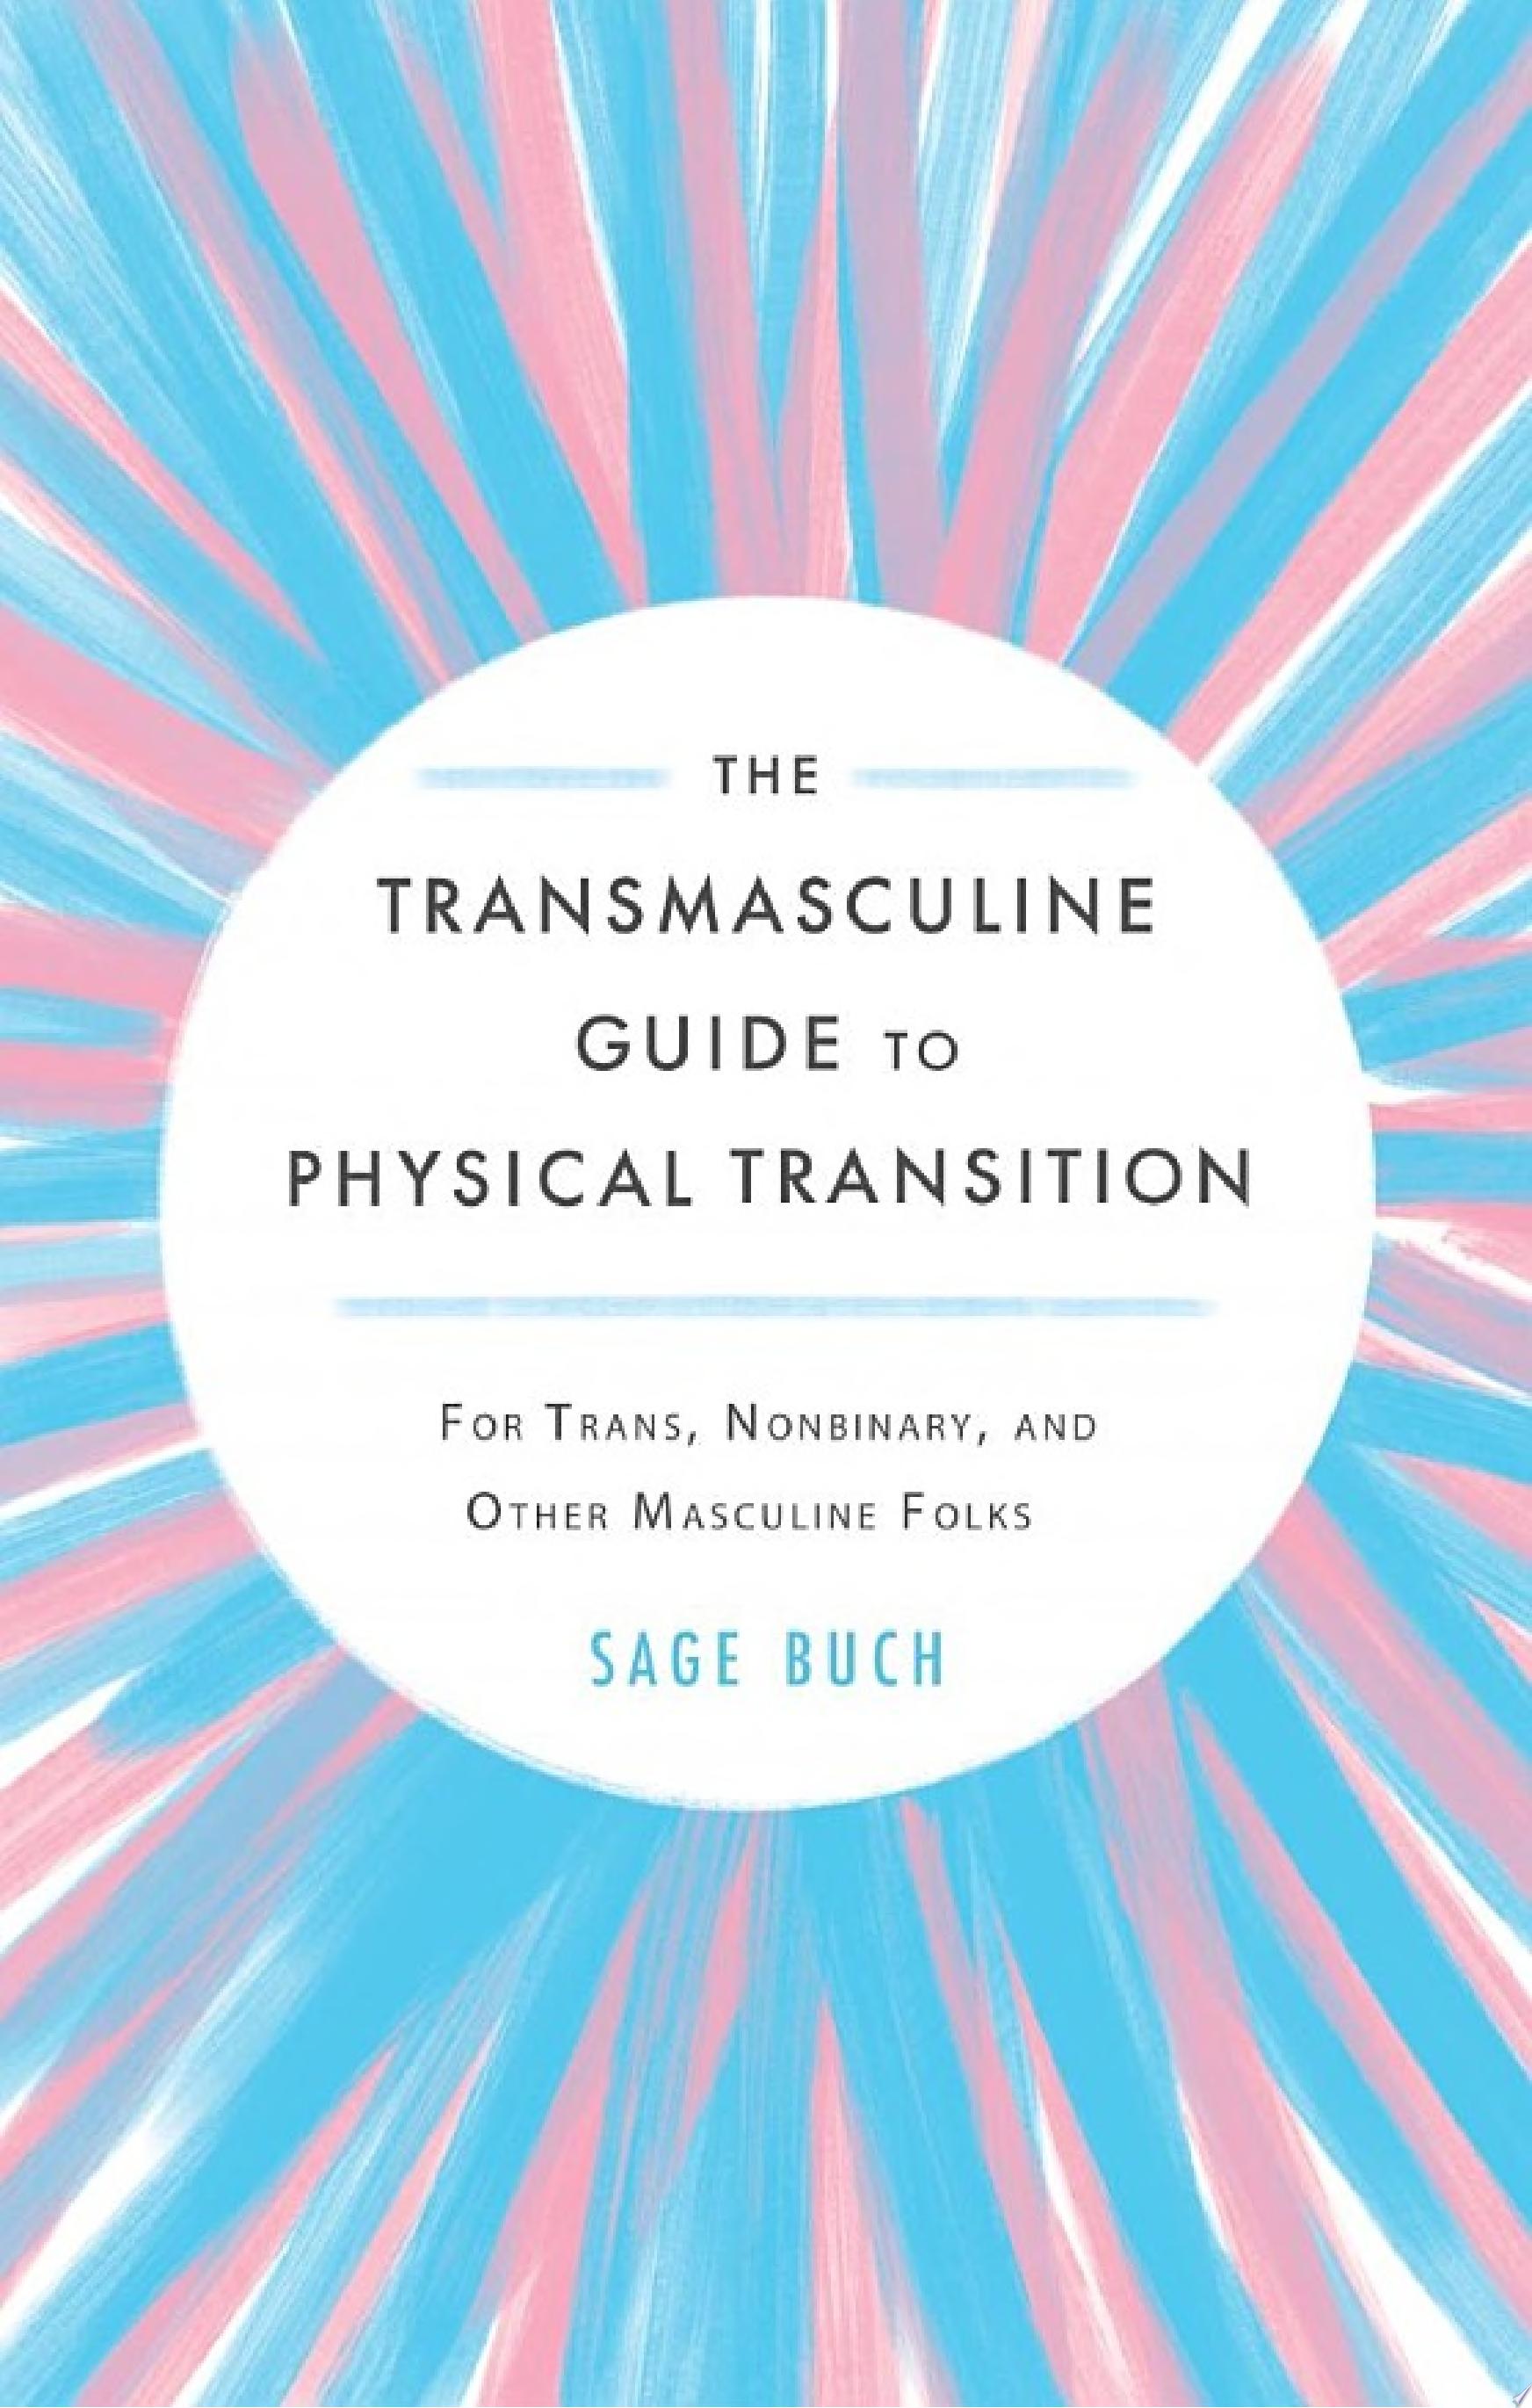 Image for "The Transmasculine Guide to Physical Transition"